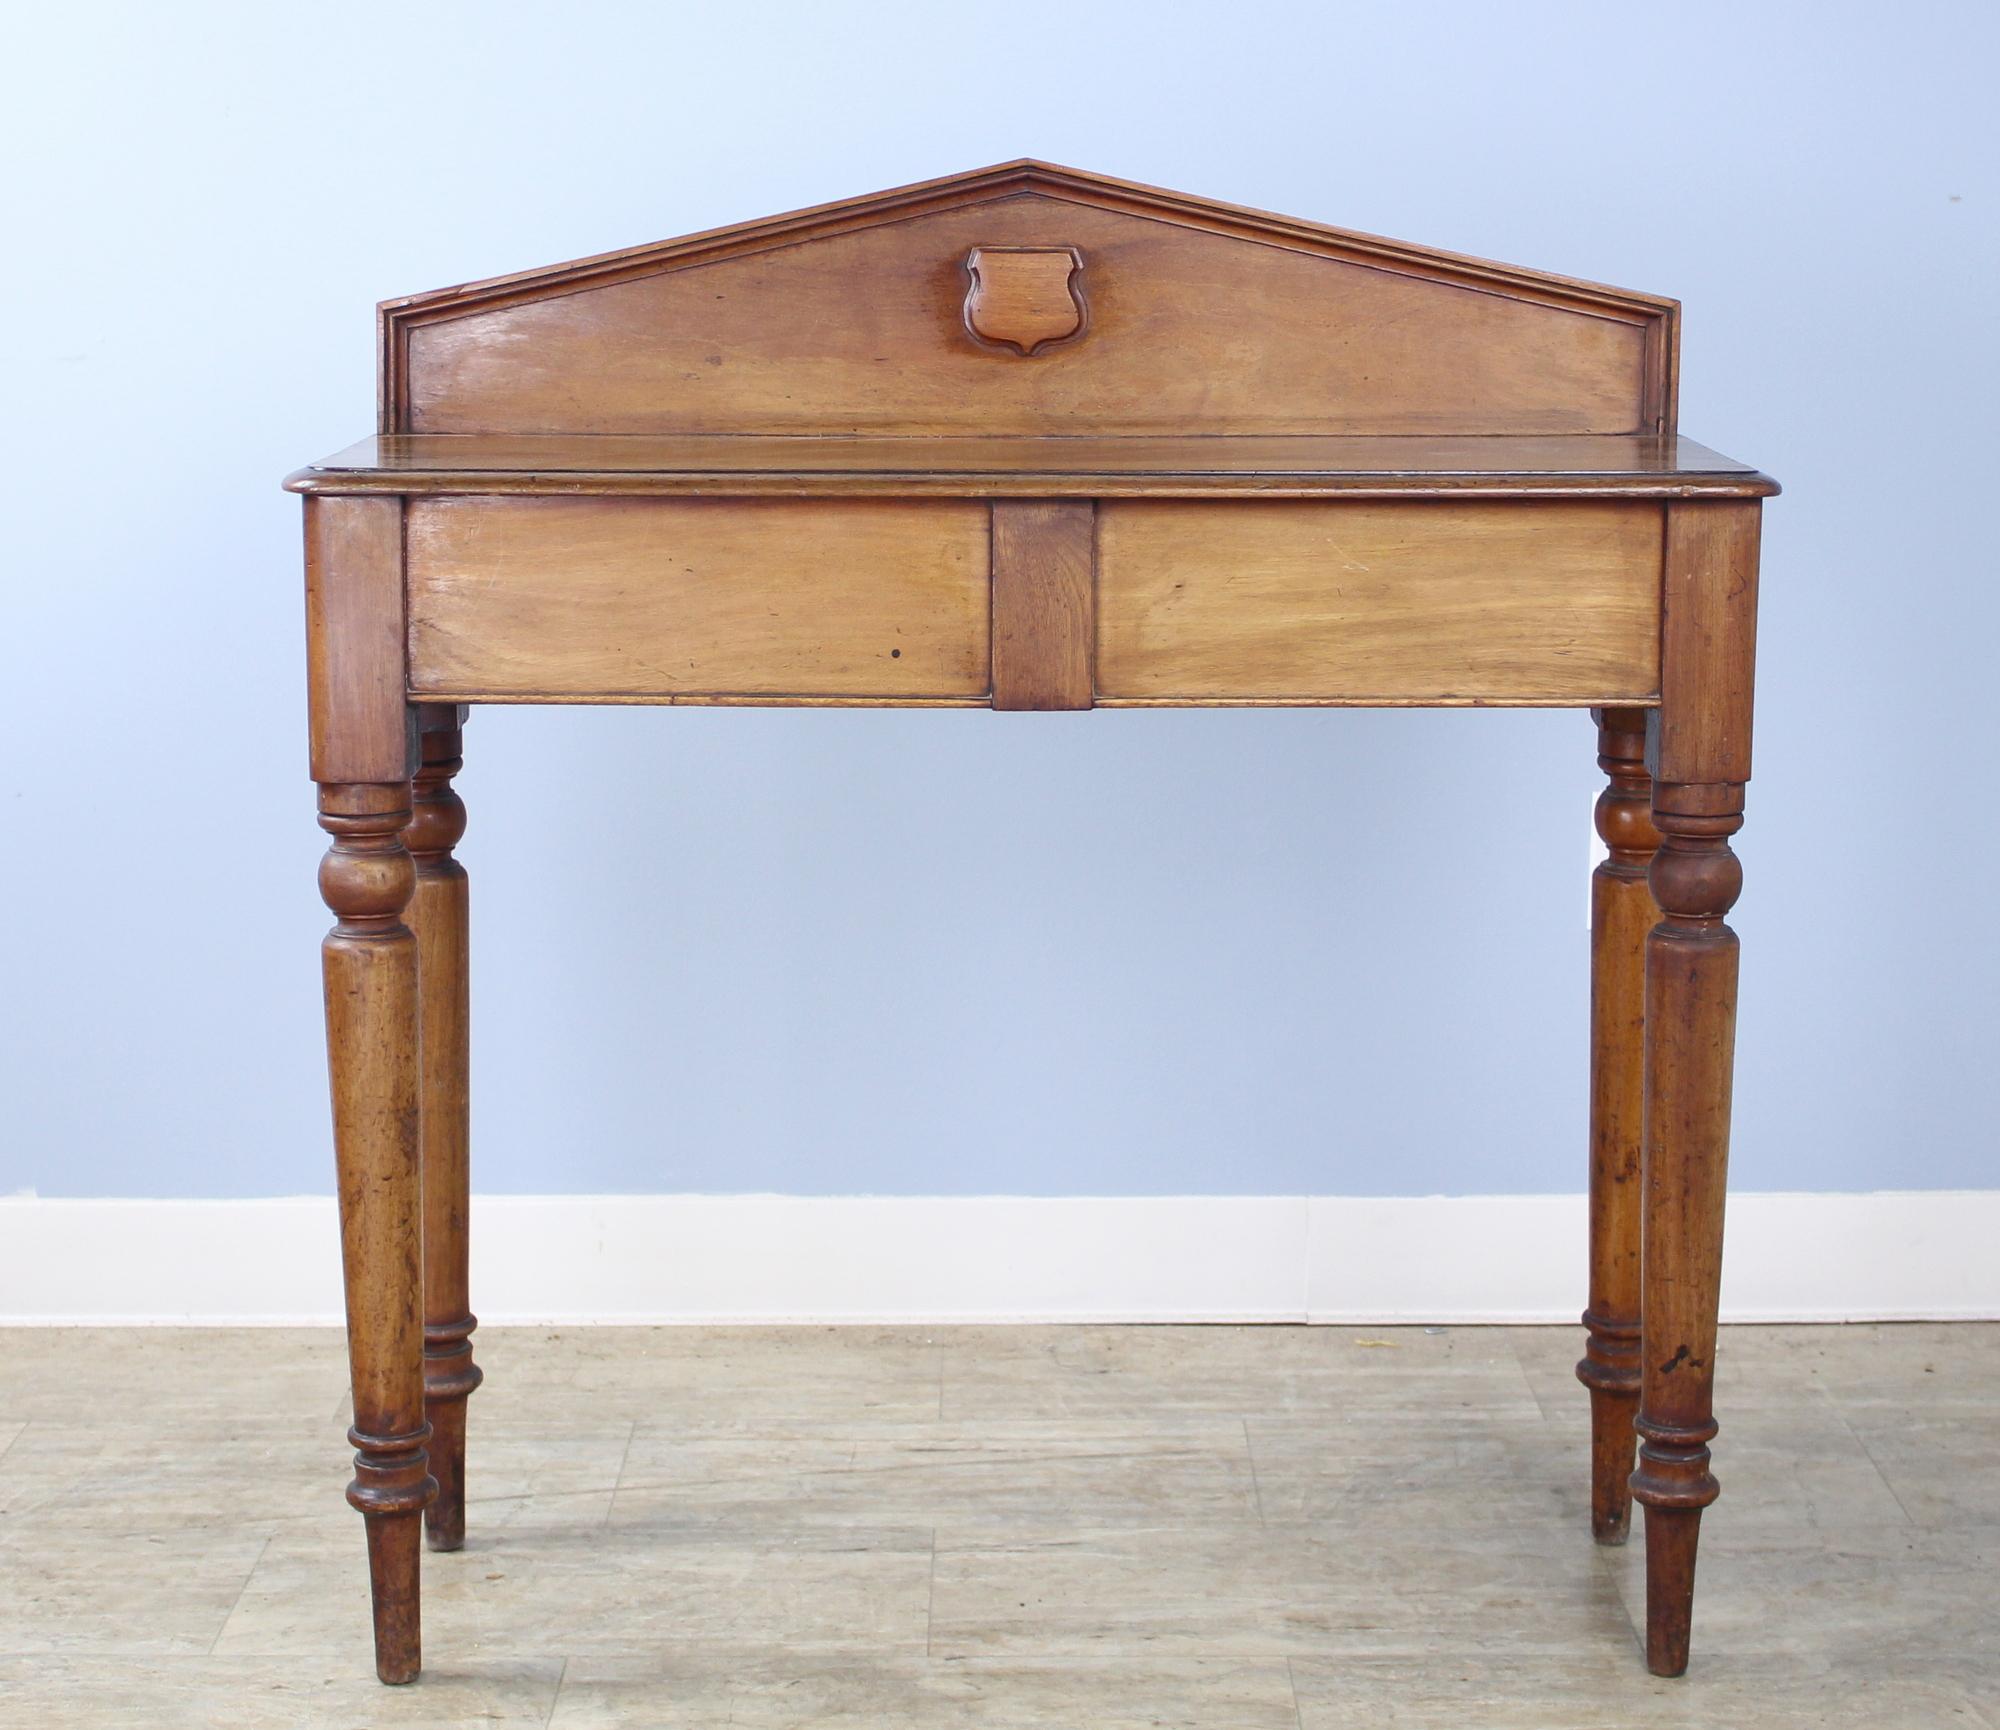 A small Victorian console table in mellow mahogany with a secret compartment on the right side. Pretty turned legs and a galleried back with a decorative medallion. This is the perfect hall piece for lamps and keys, or a good table for behind a love